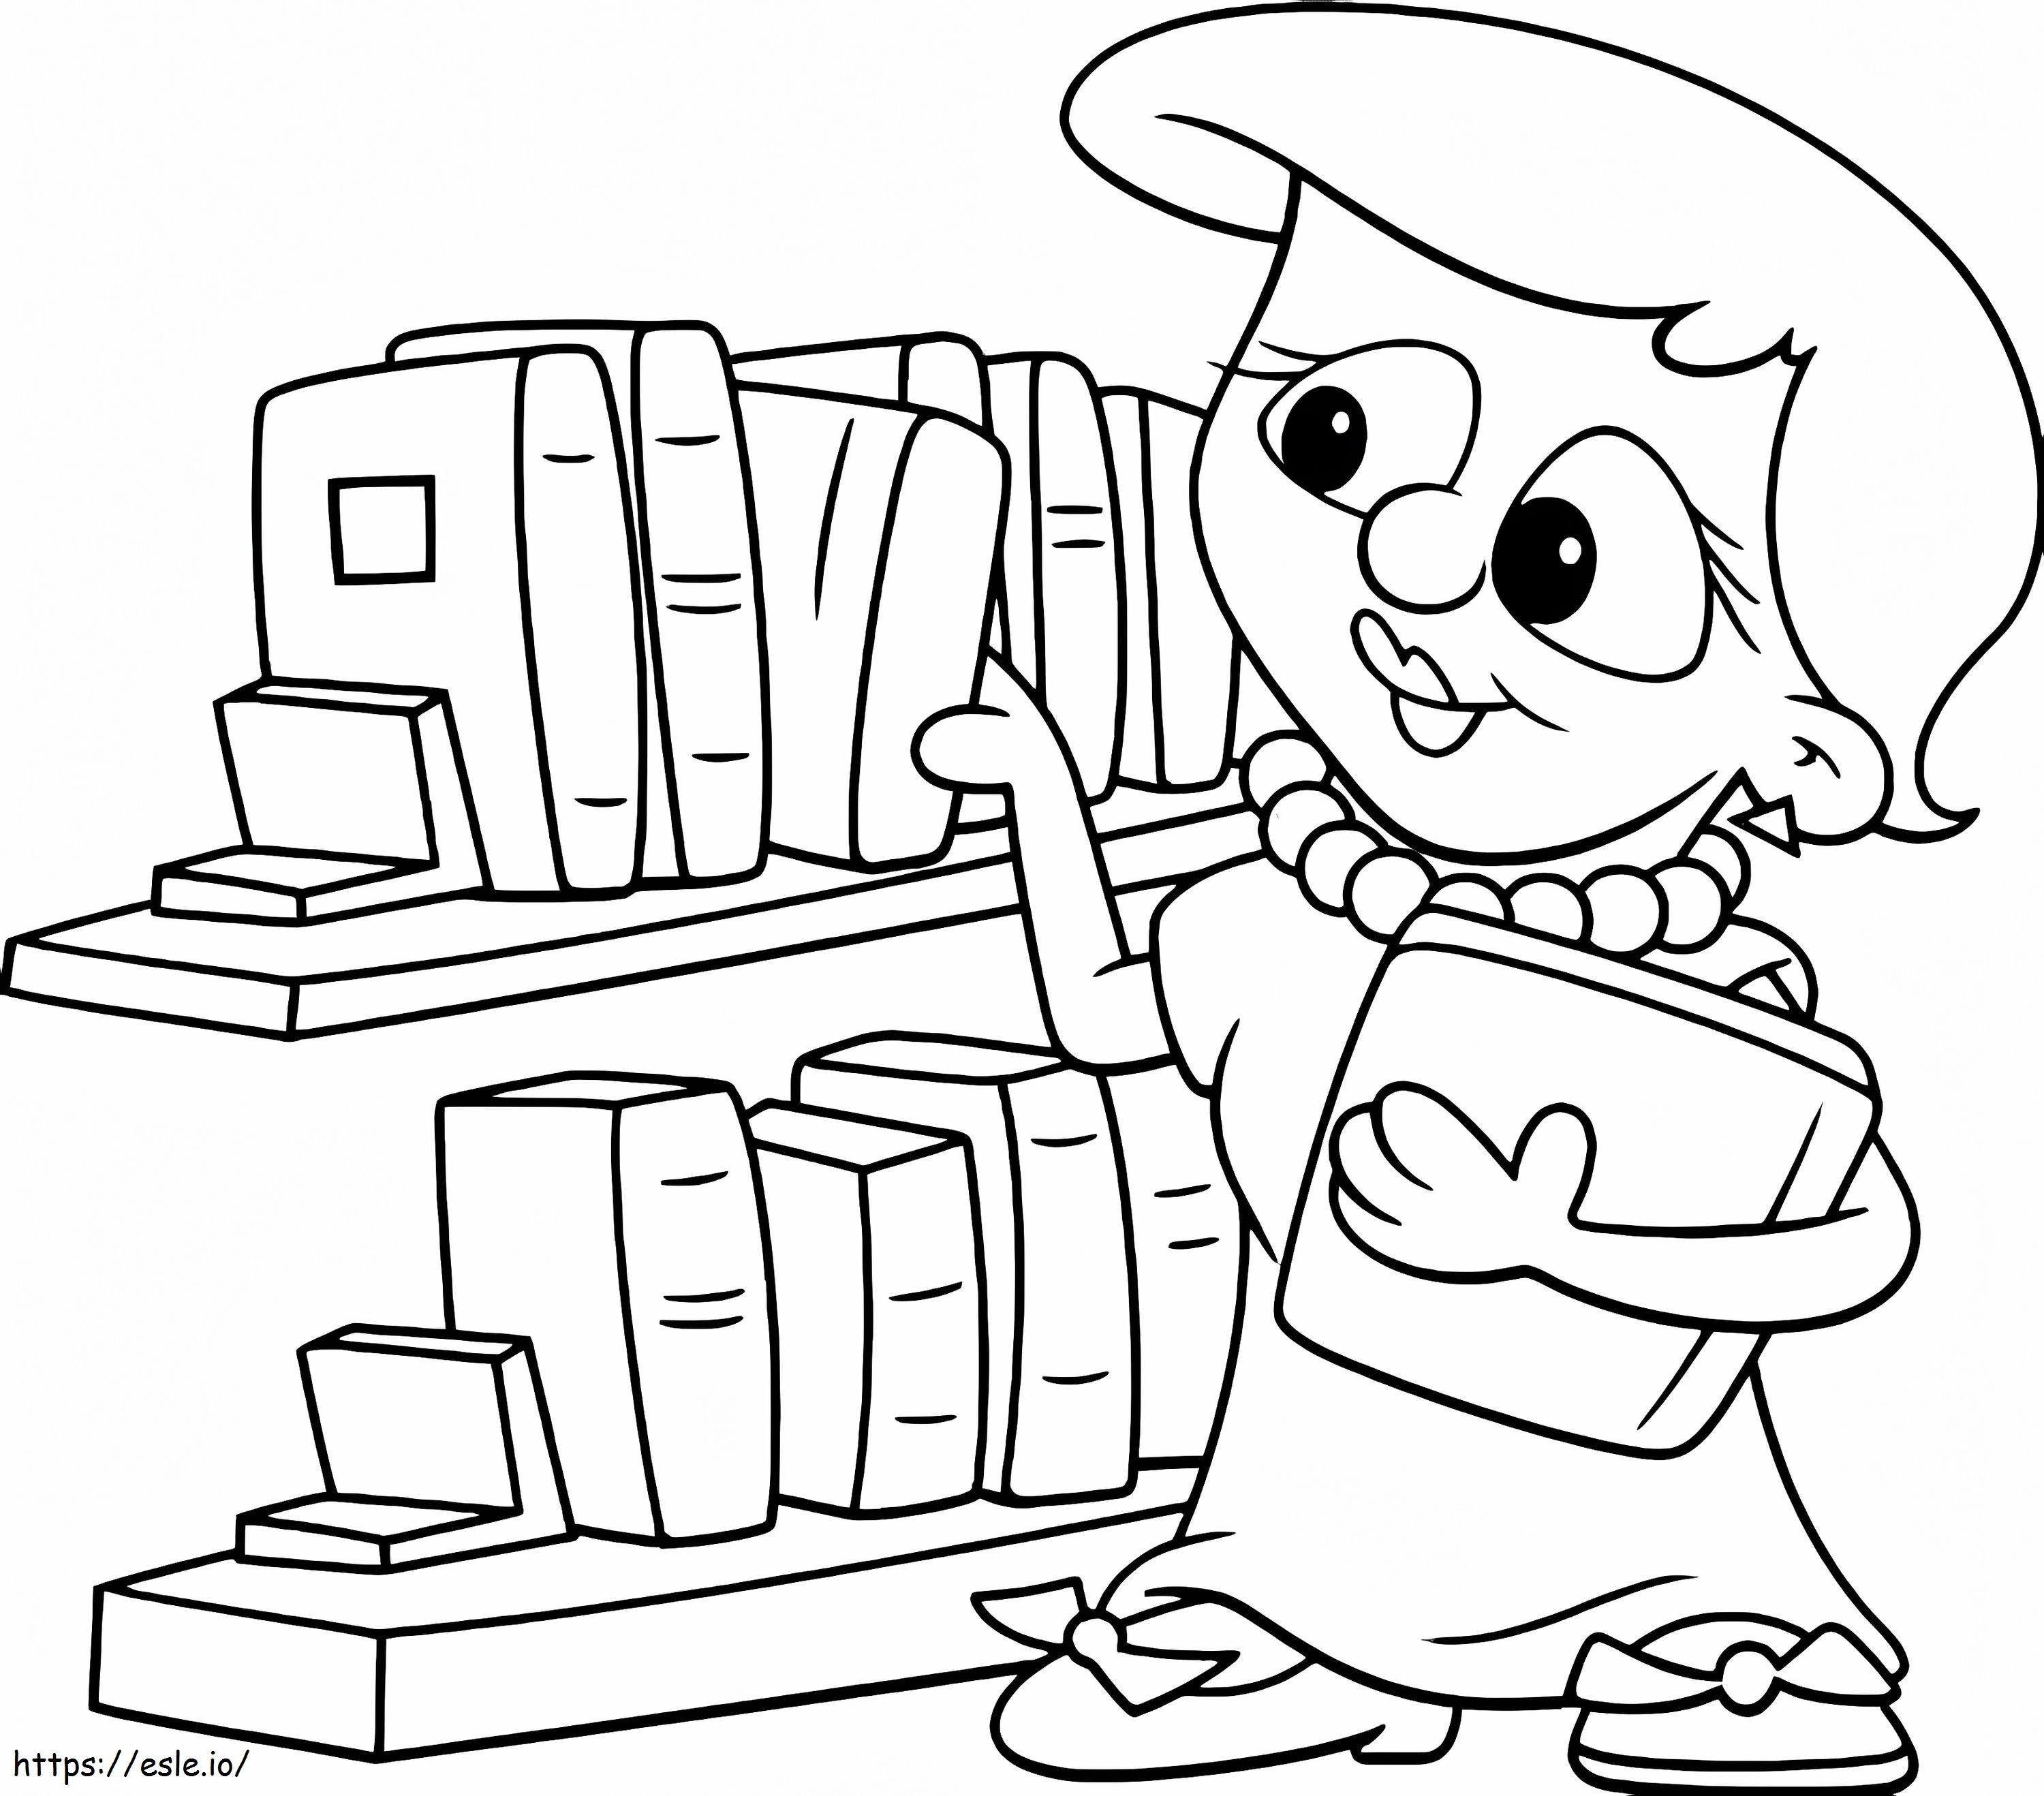 Librarian 7 coloring page